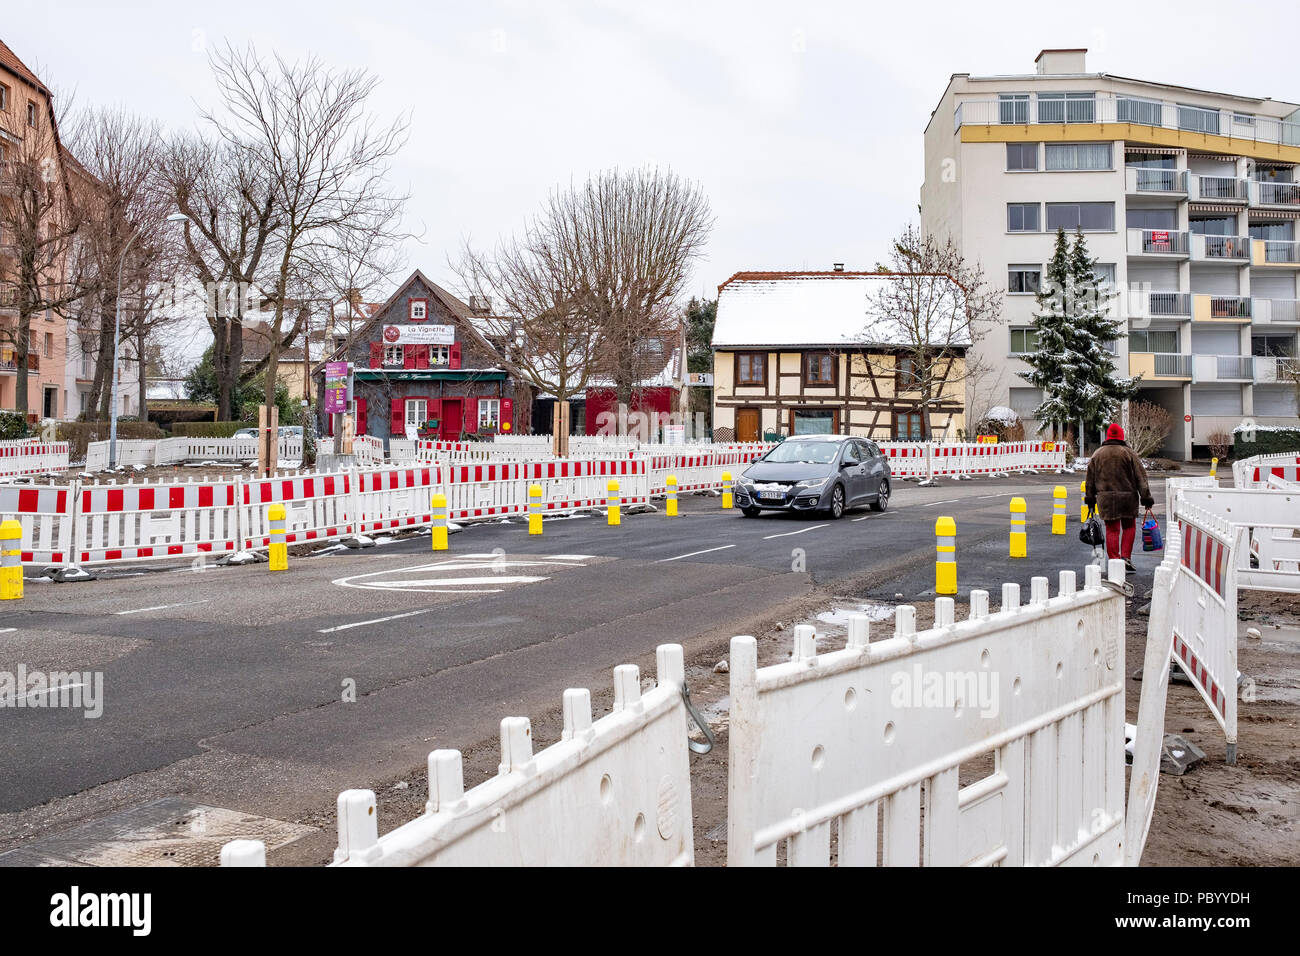 Strasbourg, preliminary tram construction site, line E extension, safety plastic barriers, street, car, houses, Alsace, France, Europe, Stock Photo